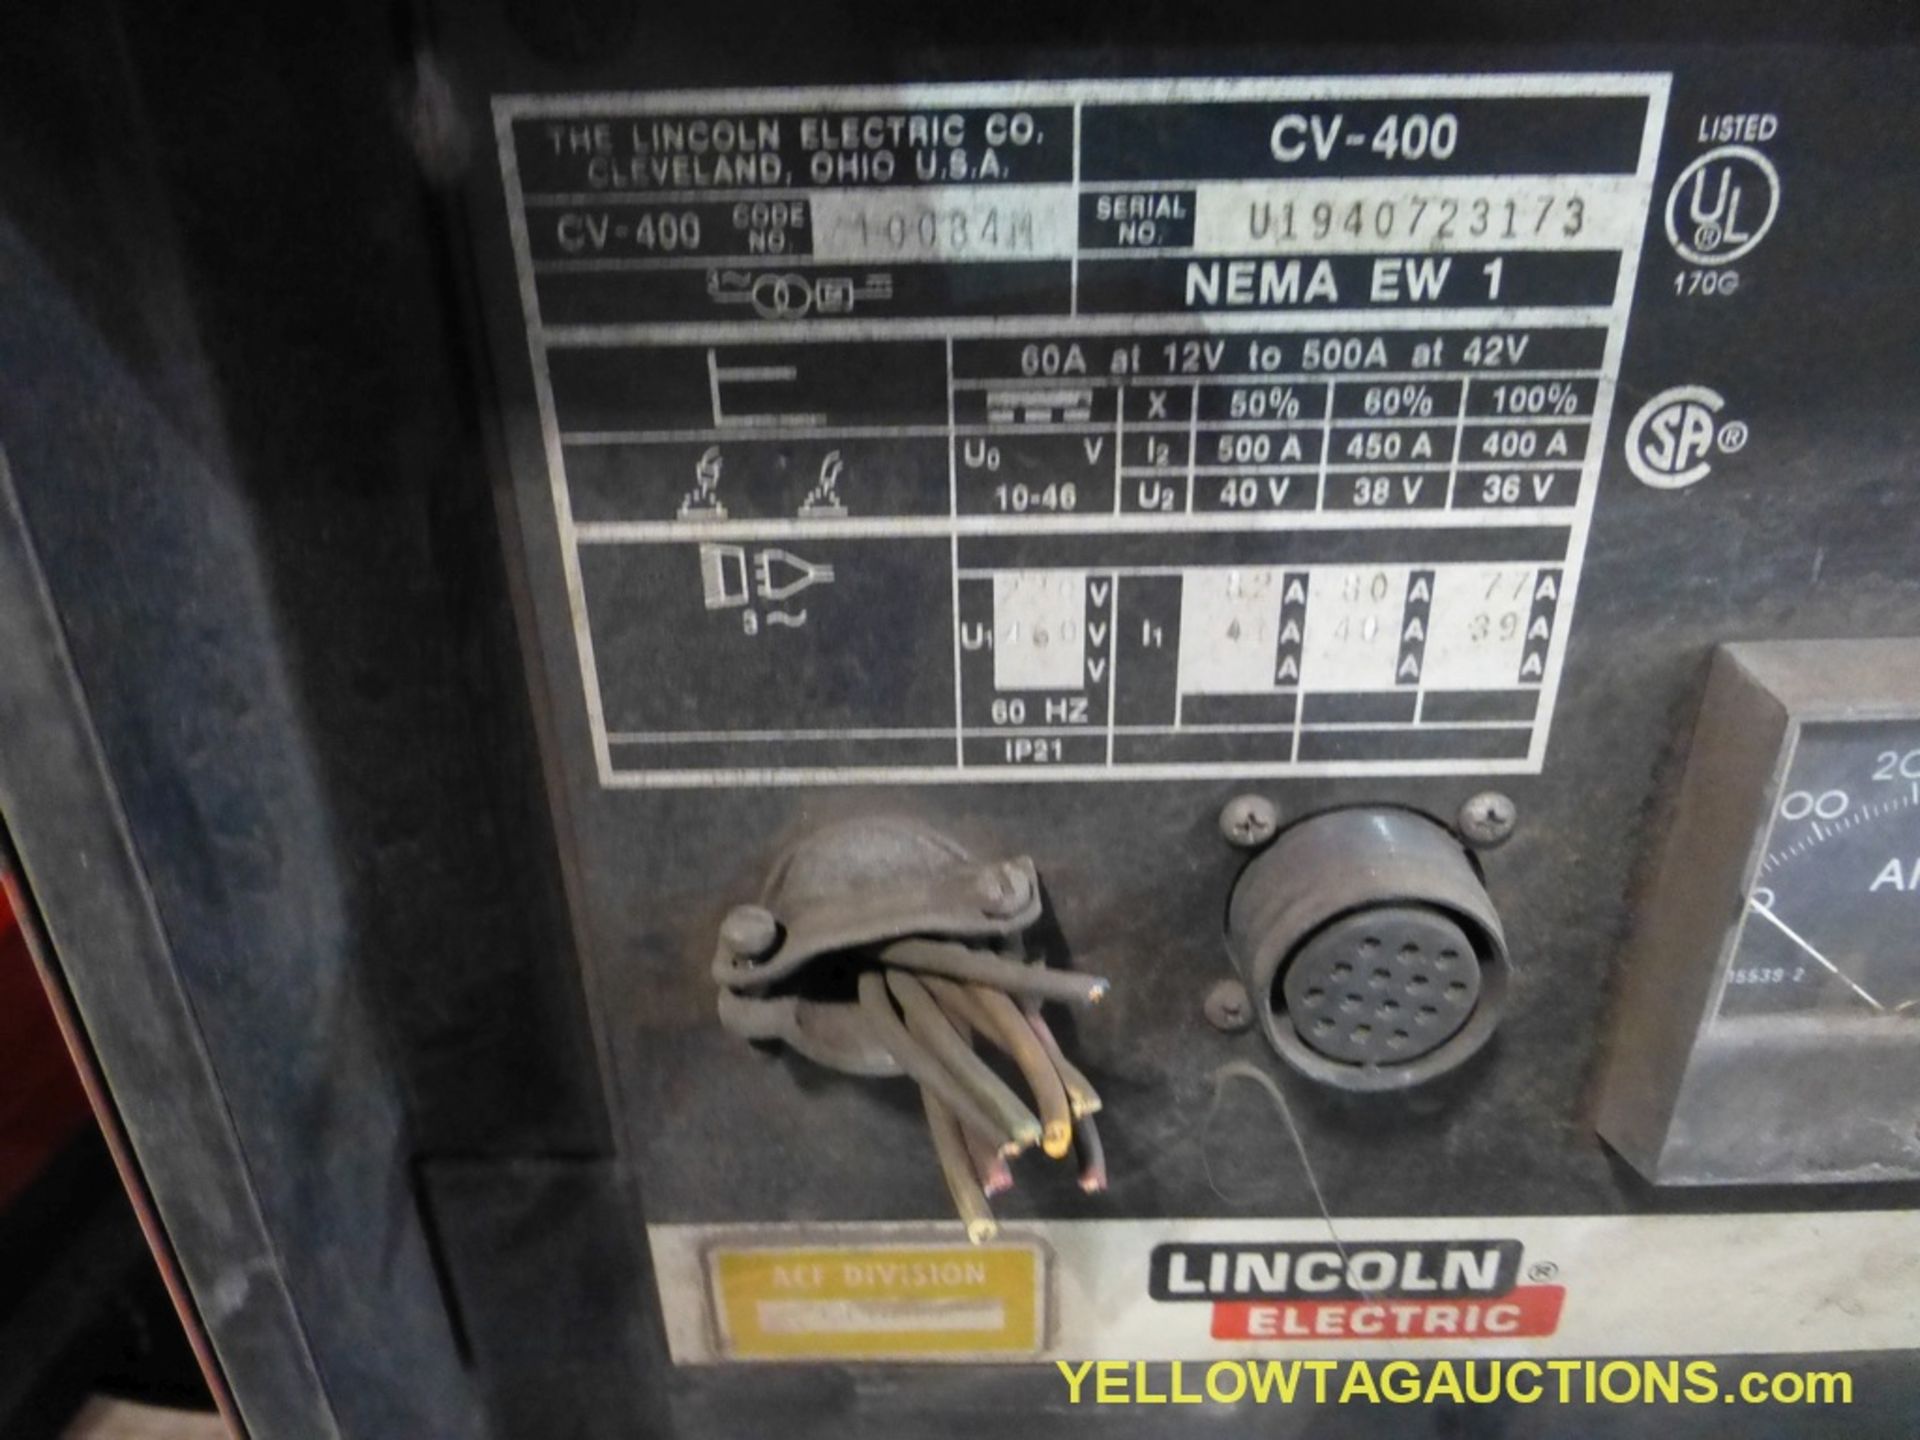 Lot of (2) Lincoln Electric CV-400 Welder | Model No. CV-400; Code: 10084M; 60A at 12V to 500A at 42 - Image 3 of 8